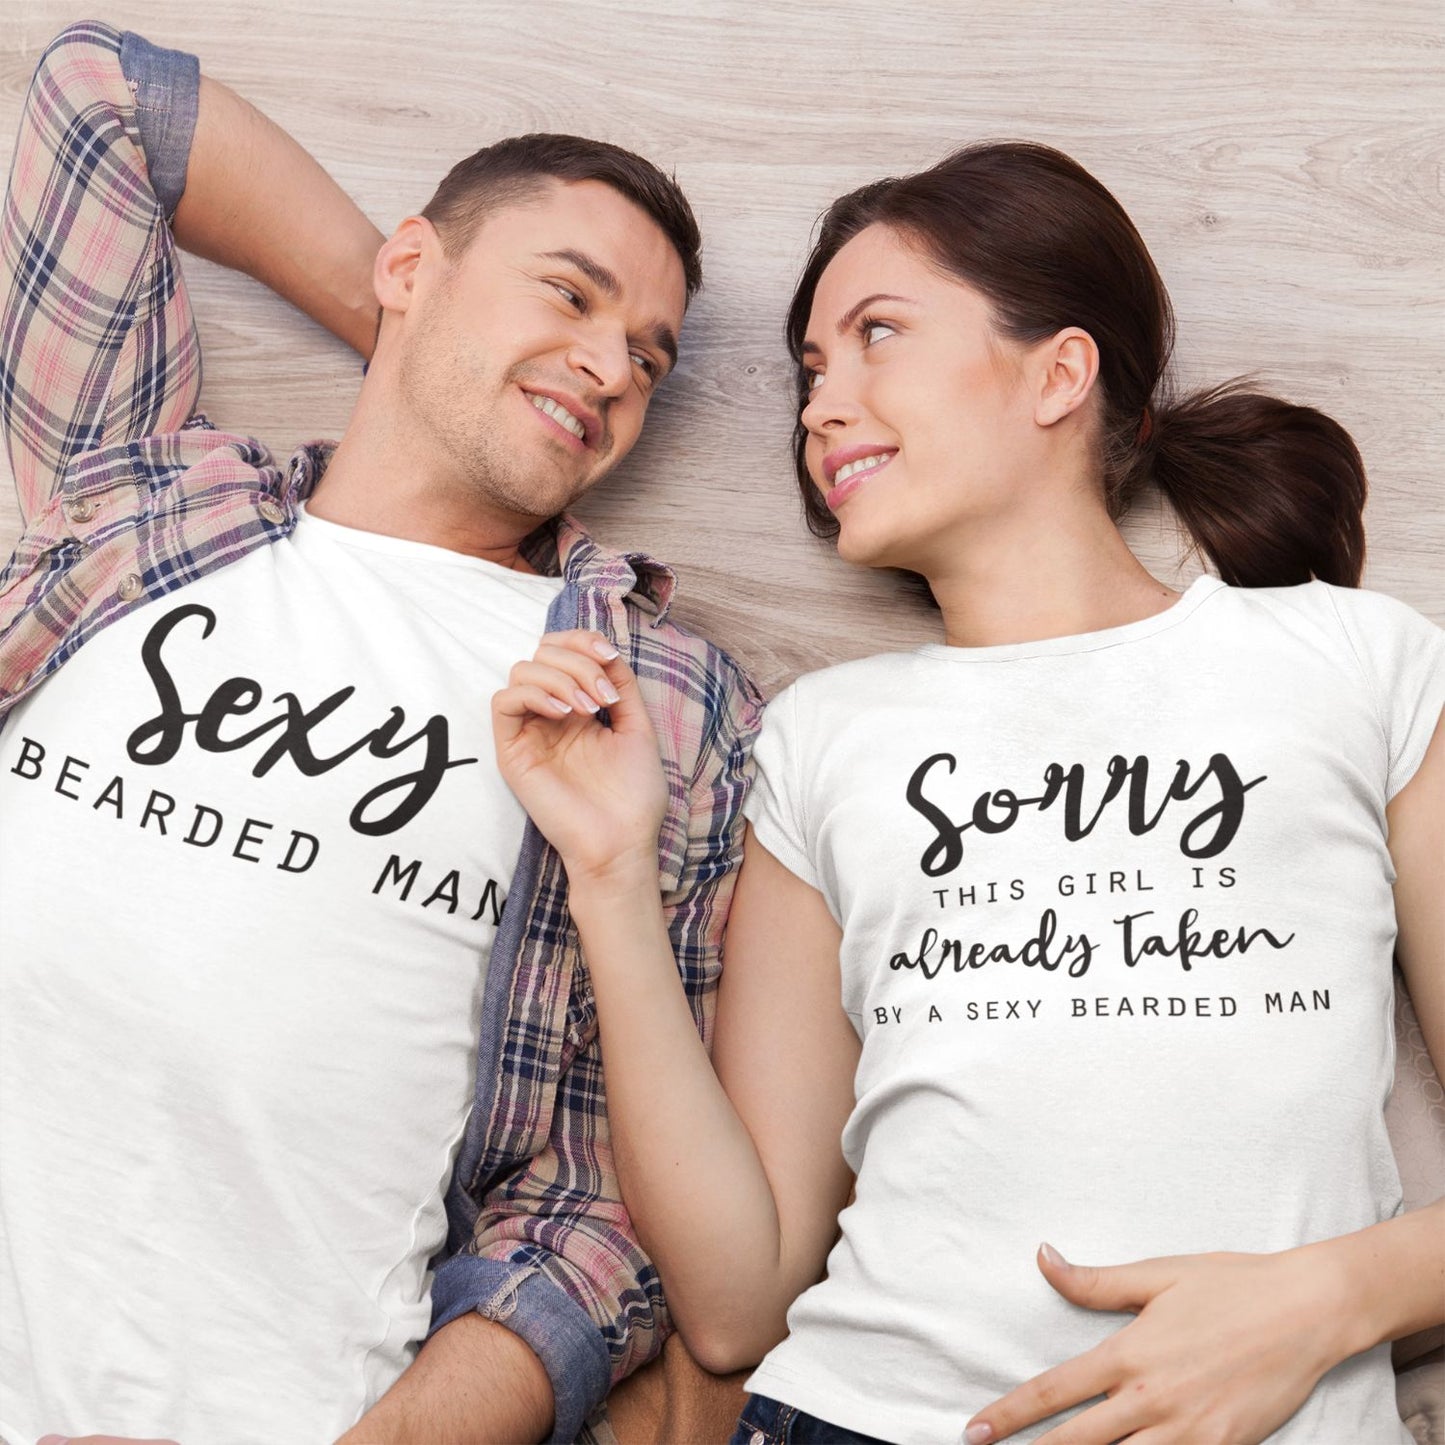 Bearded Man & Taken Girl Humorous Matching Outfits - Ideal Couple Gift Set for Valentine's Day